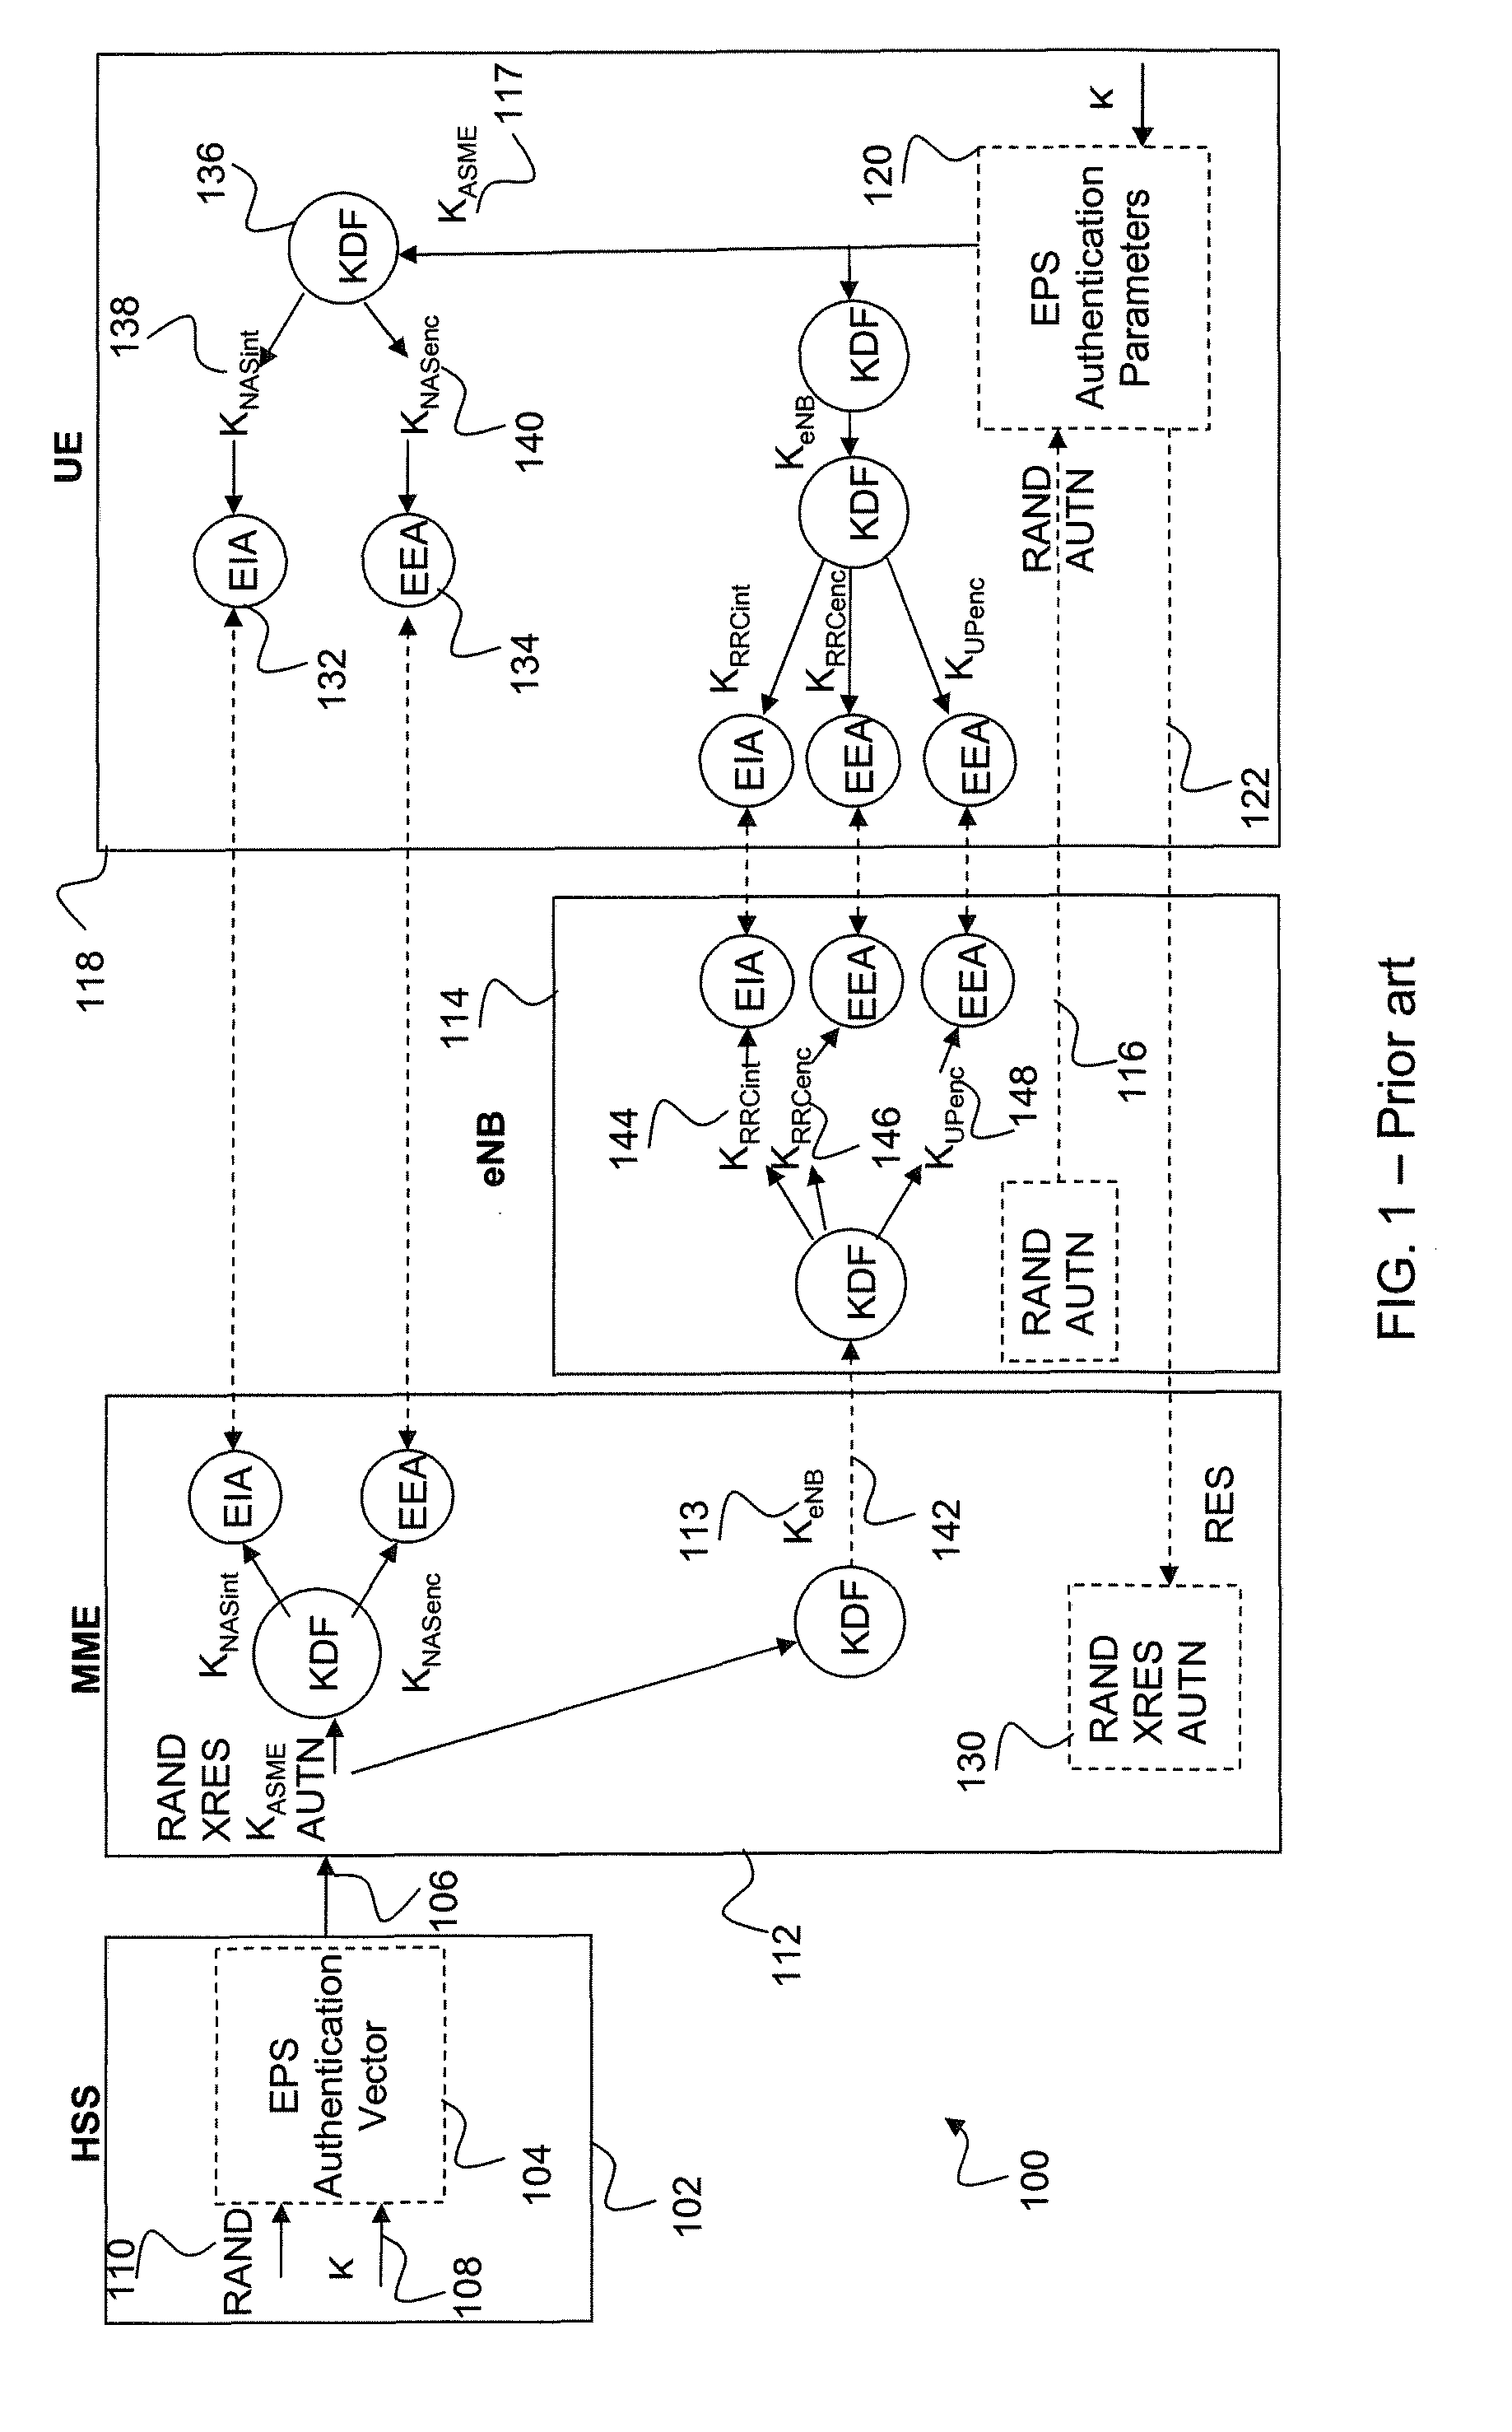 Apparatus and Methods for Key Generation